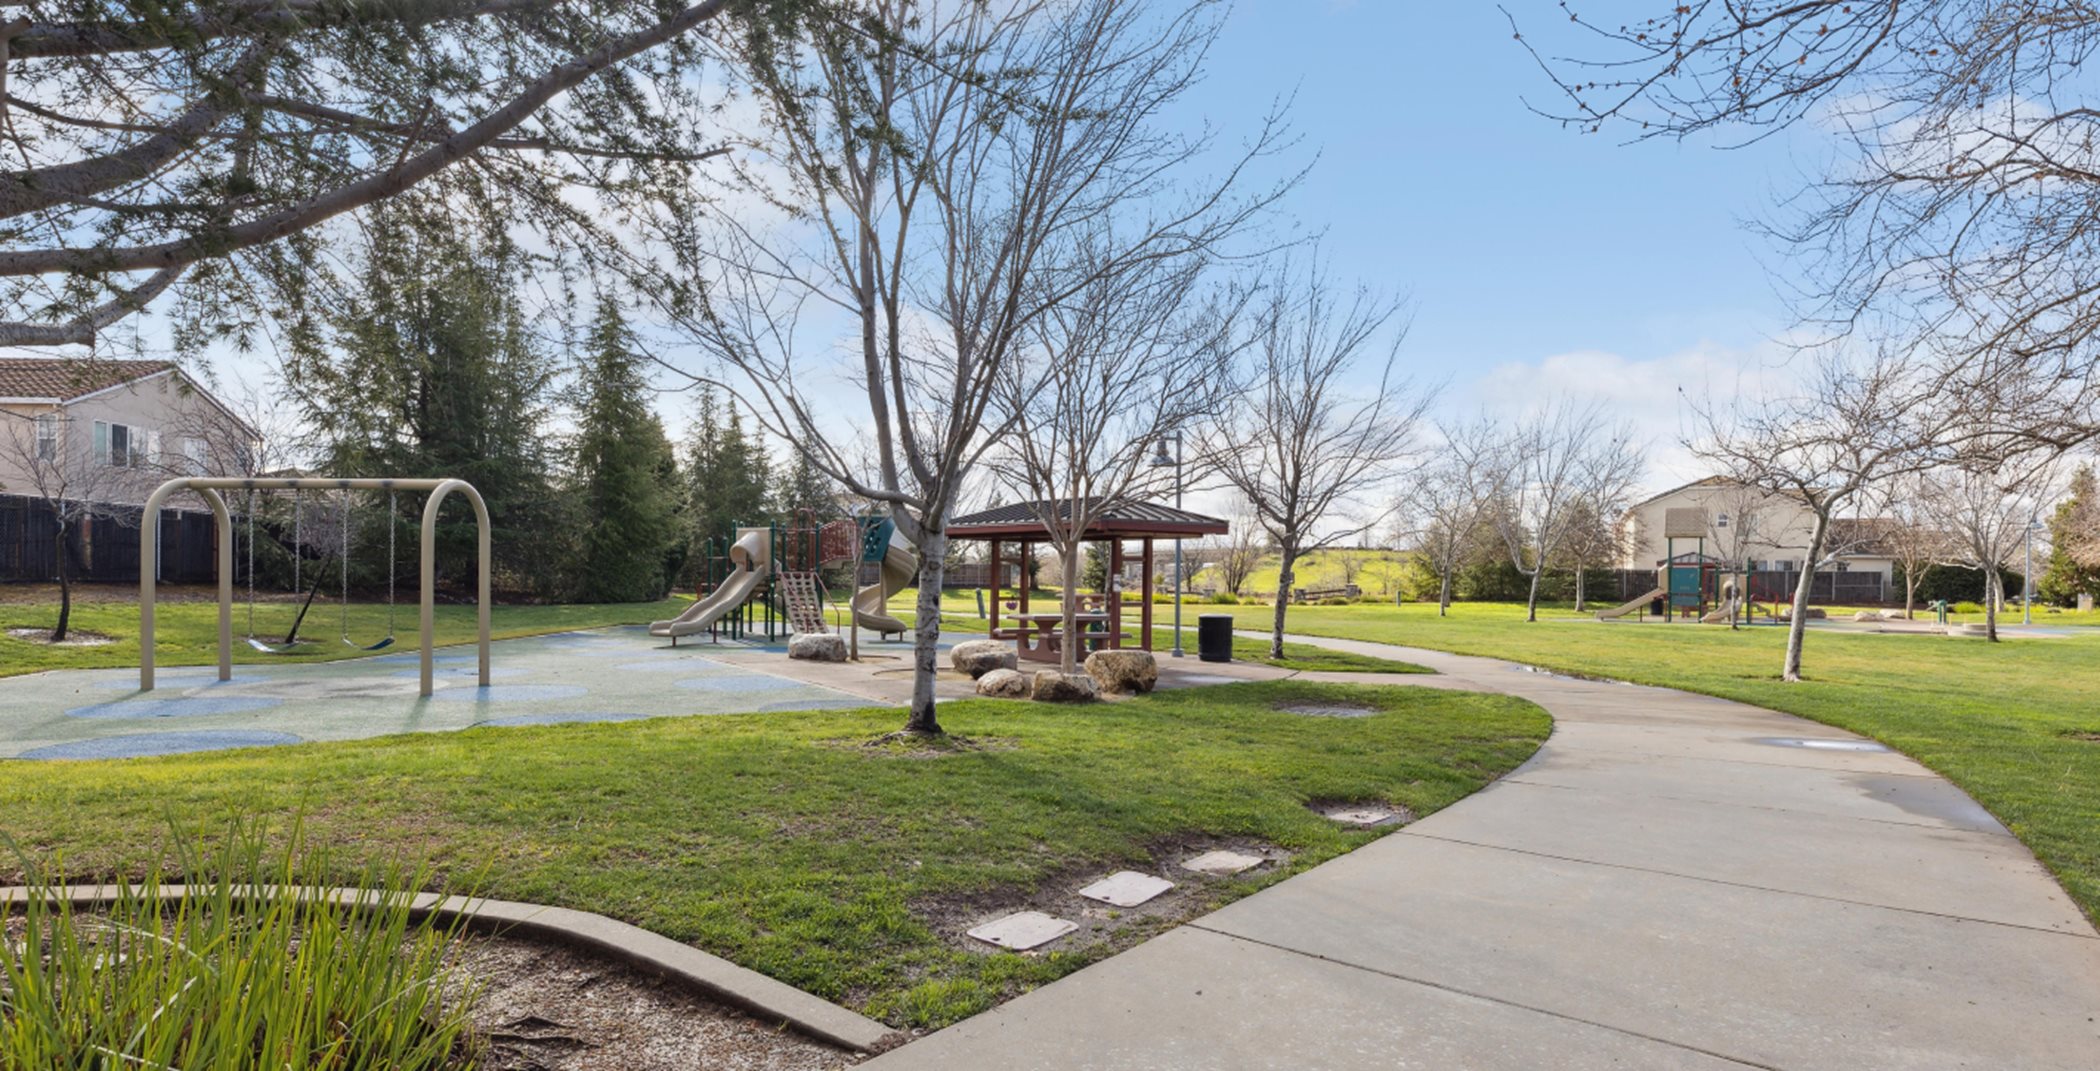 Paved path through the park surrounded by grass, trees, and a swingset